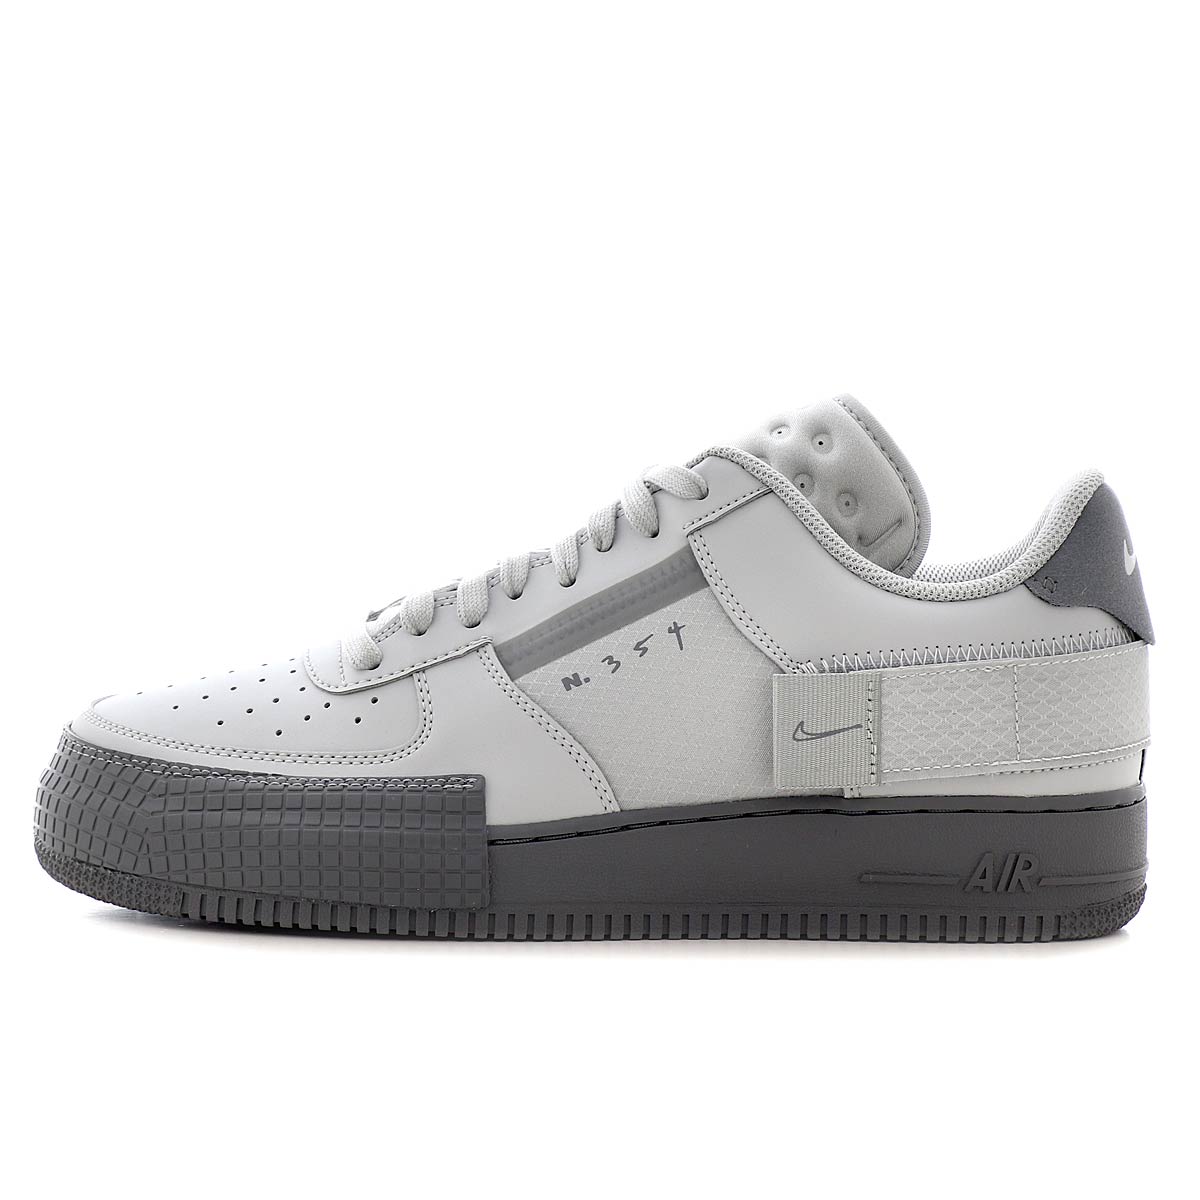 Buy AF1-TYPE 2 for N/A 0.0 | Kickz-DE-AT-INT